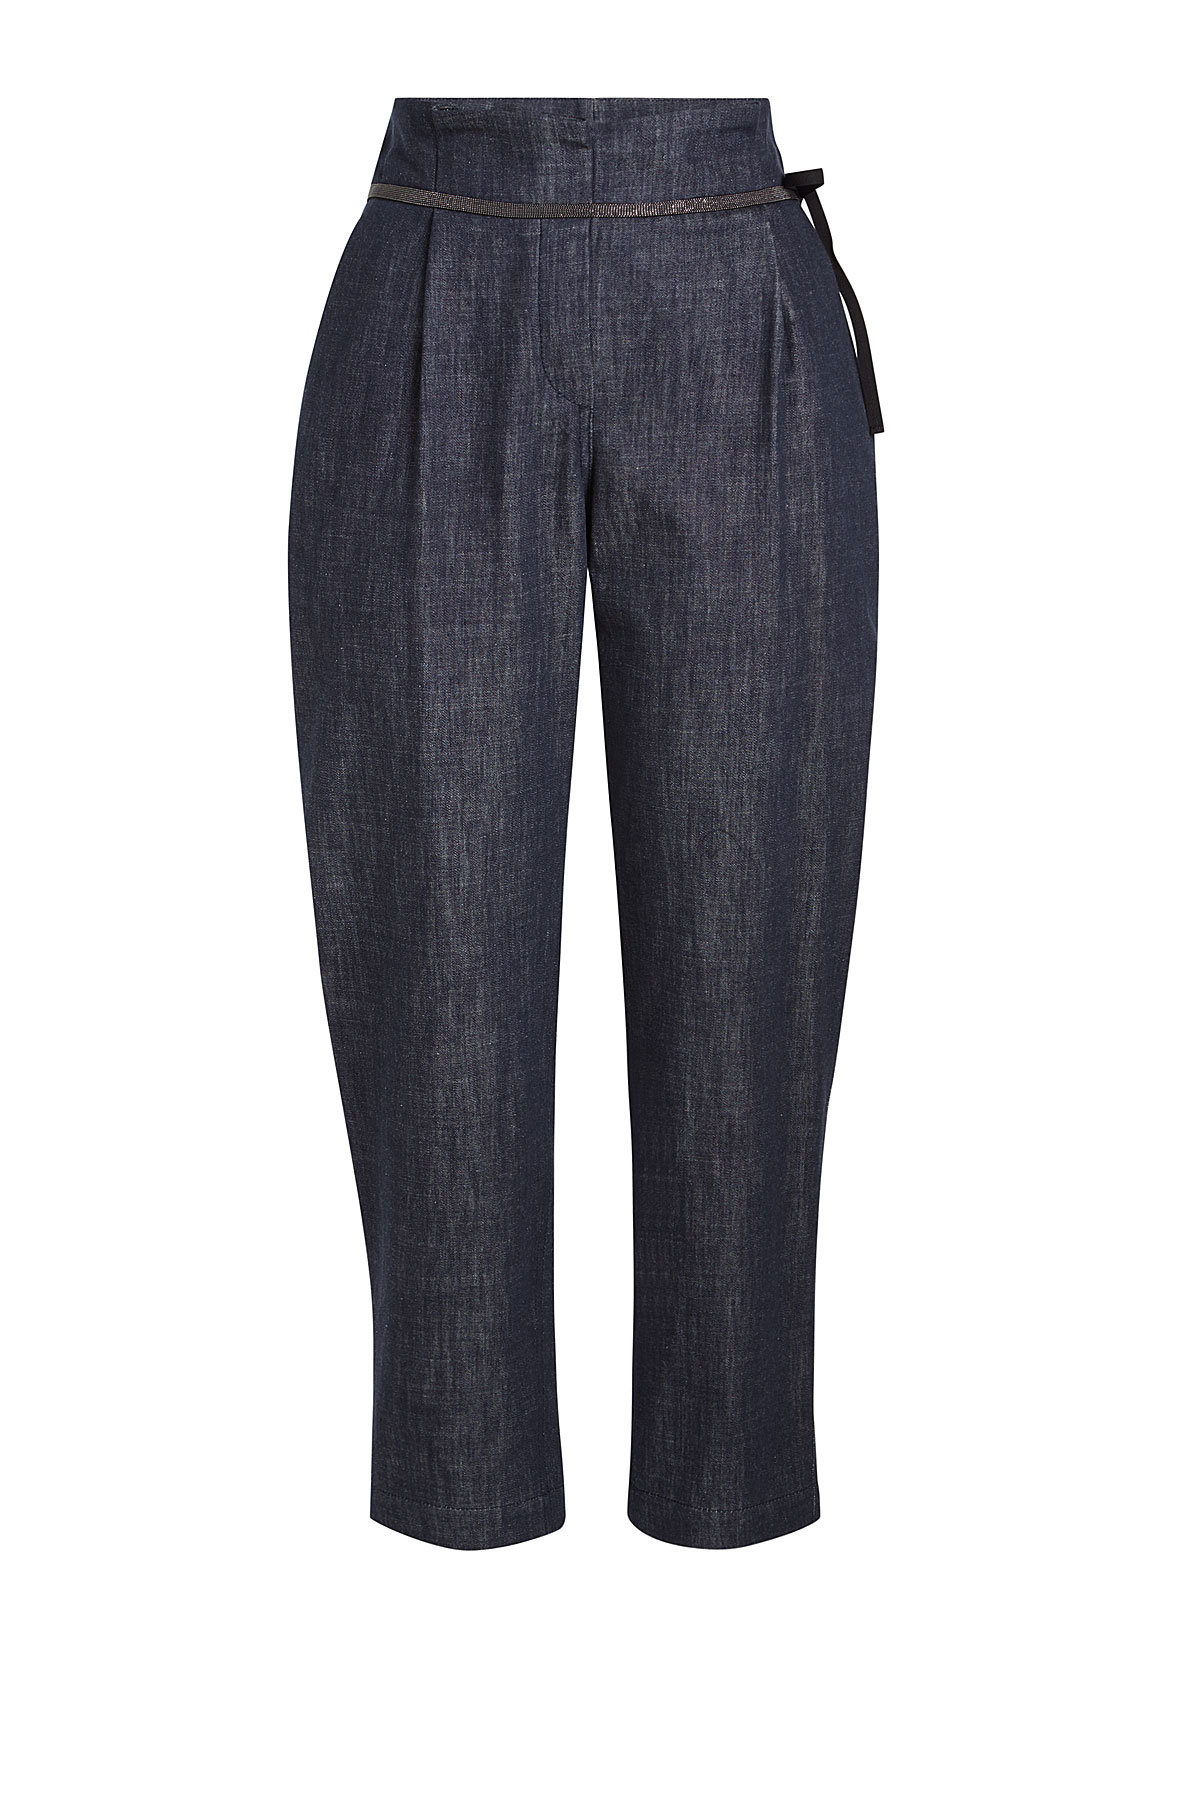 Cropped Denim Pants by Brunello Cucinelli